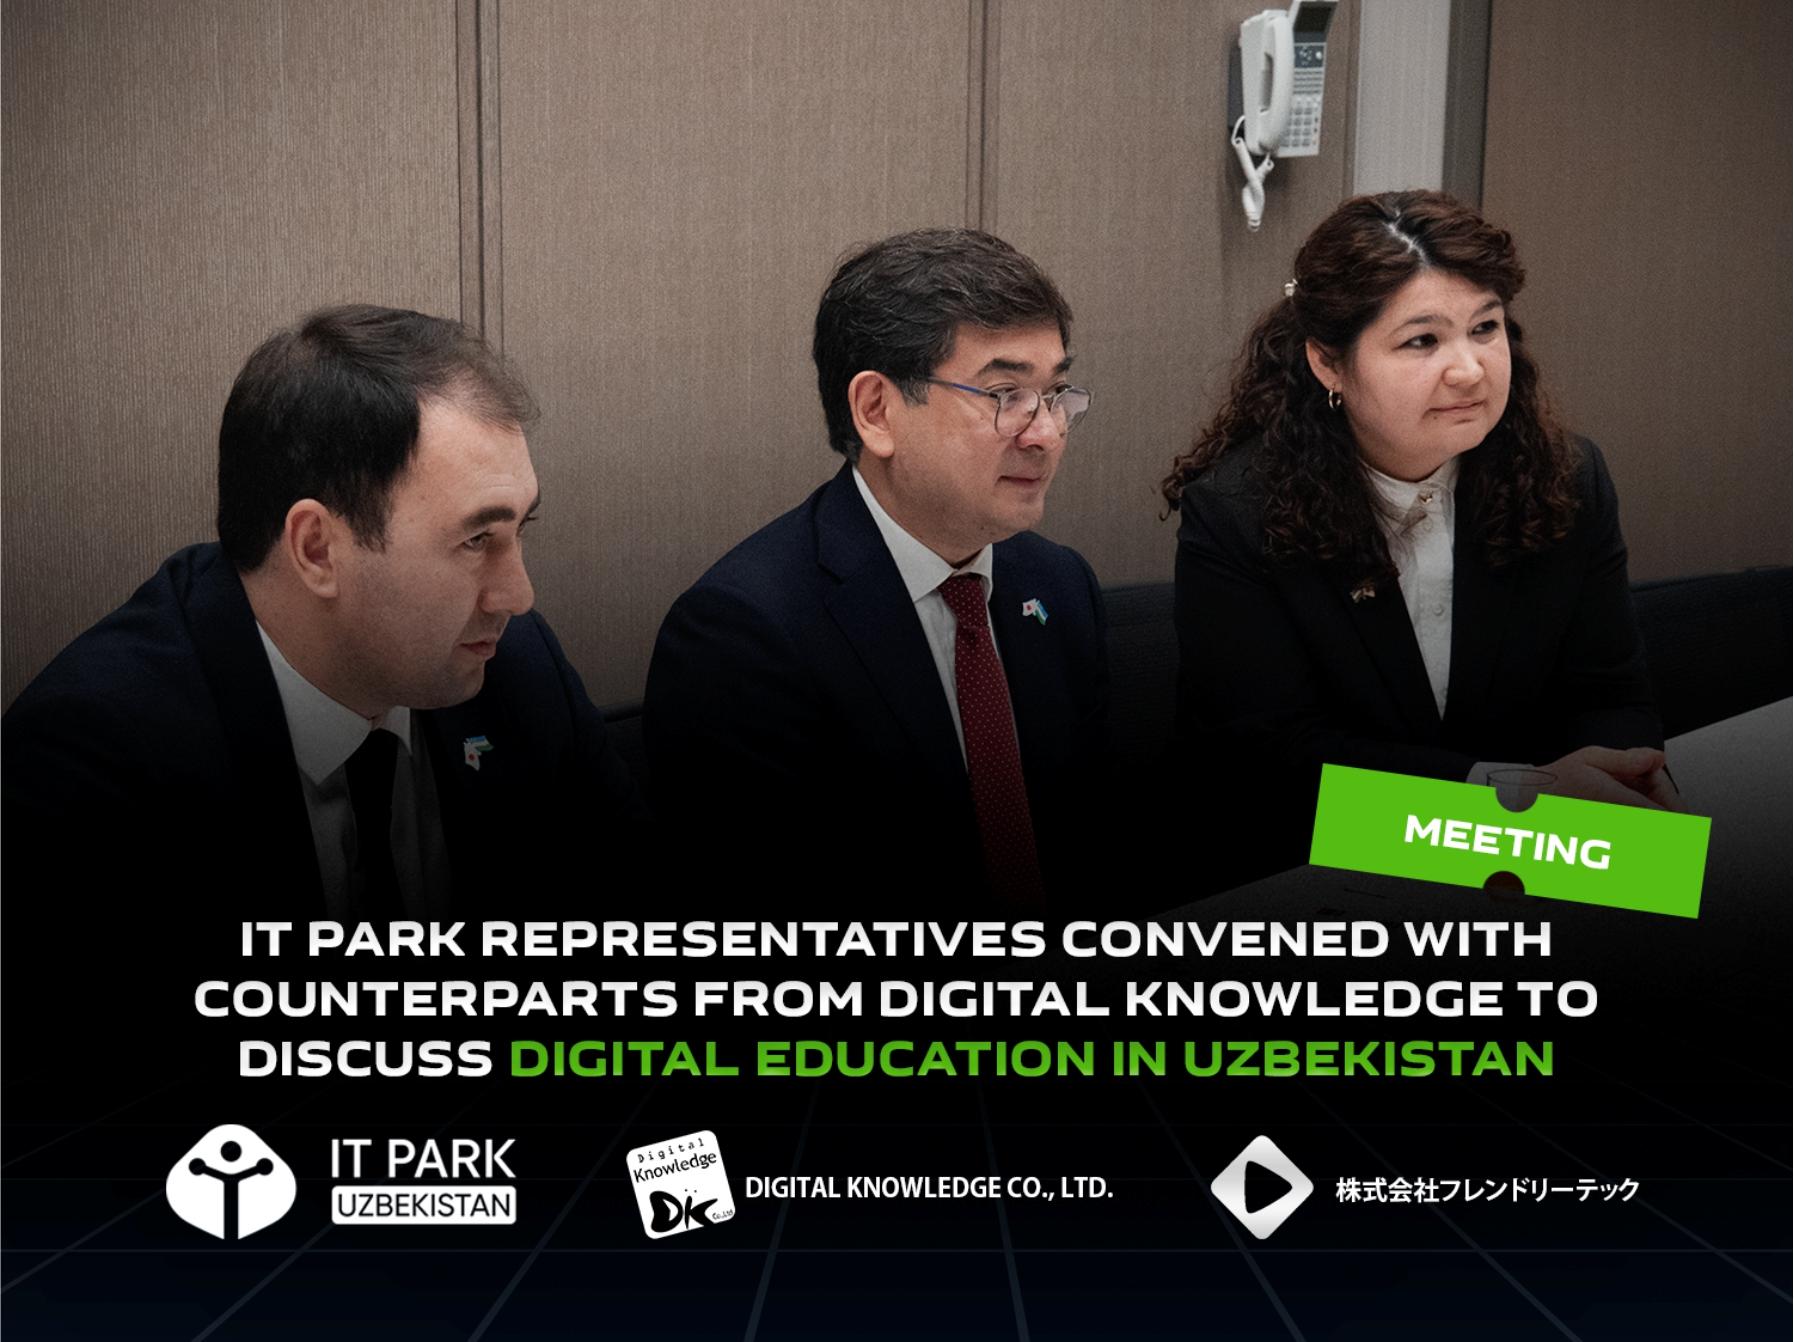 IT Park representatives convened with counterparts from Digital Knowledge to discuss digital education in Uzbekistan